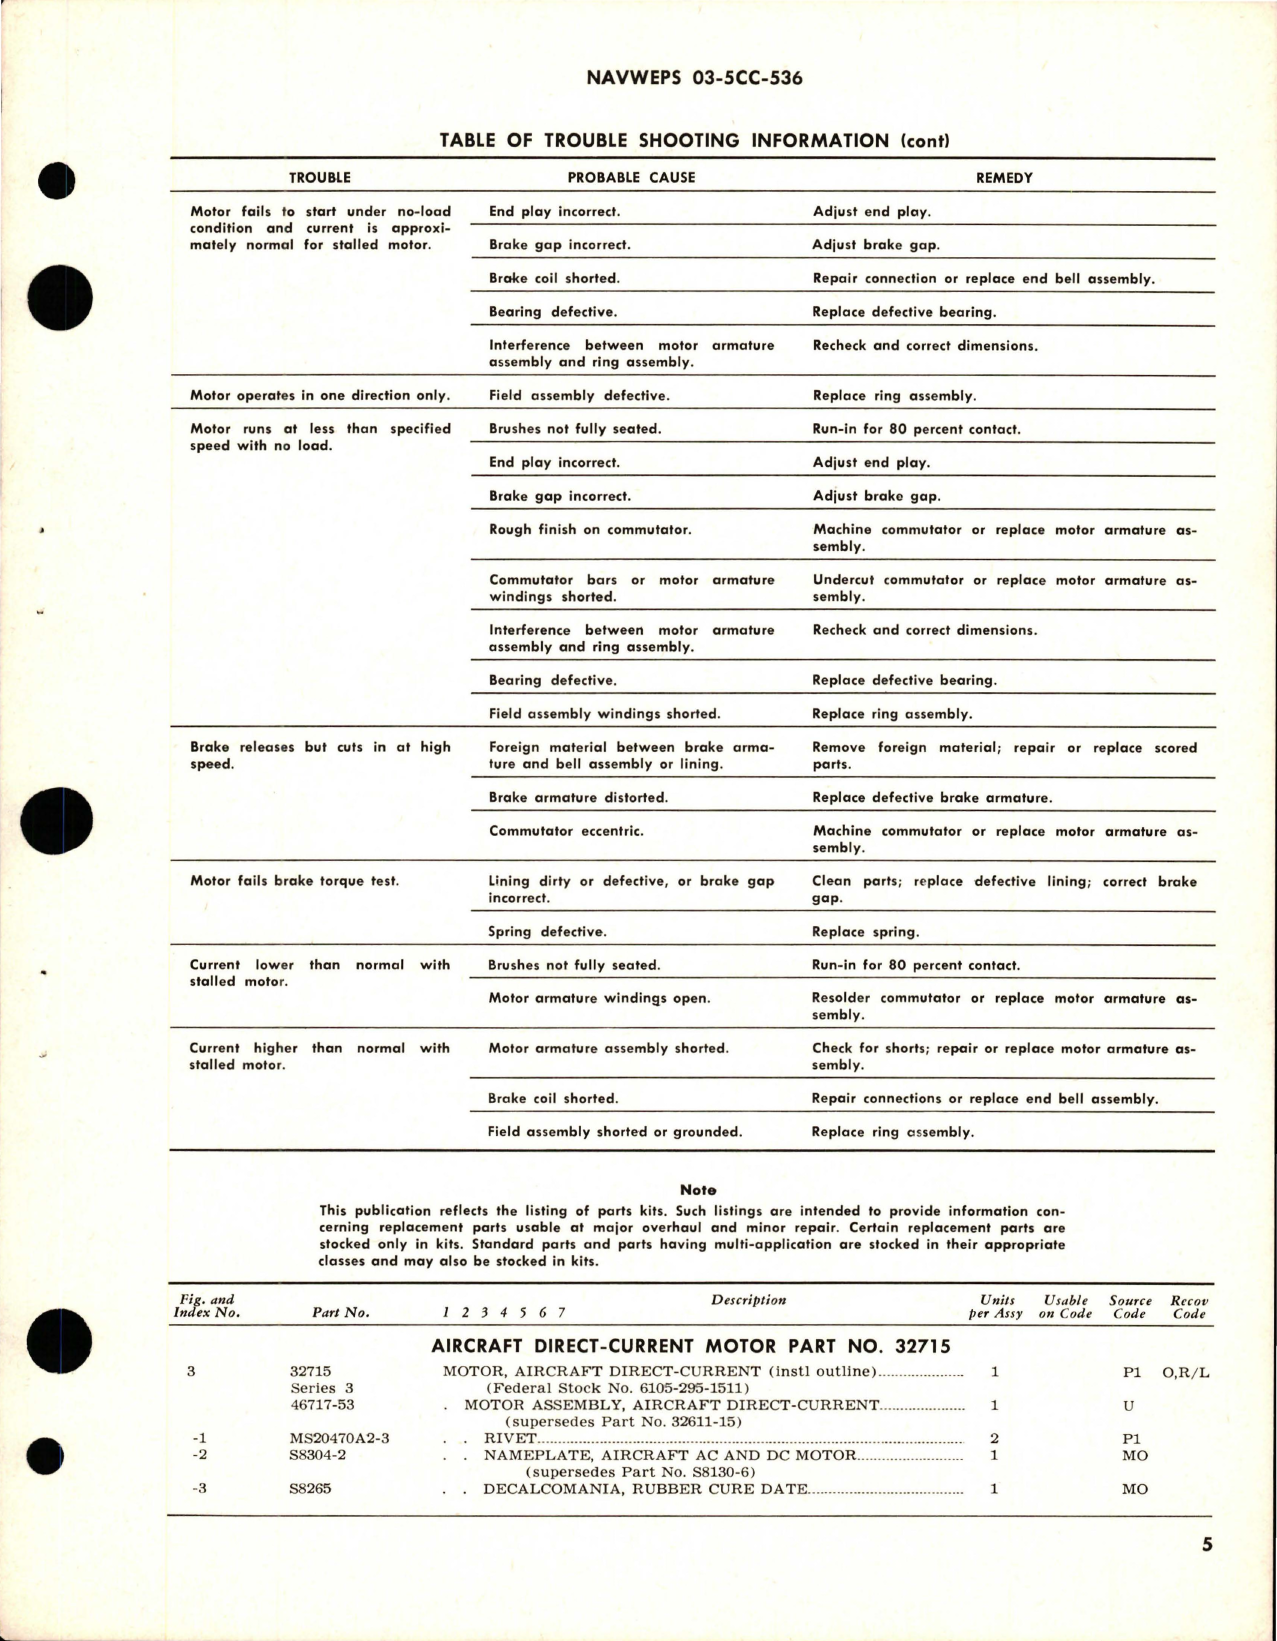 Sample page 5 from AirCorps Library document: Overhaul Instructions with Parts Breakdown for Direct-Current Motor - Part 32715 